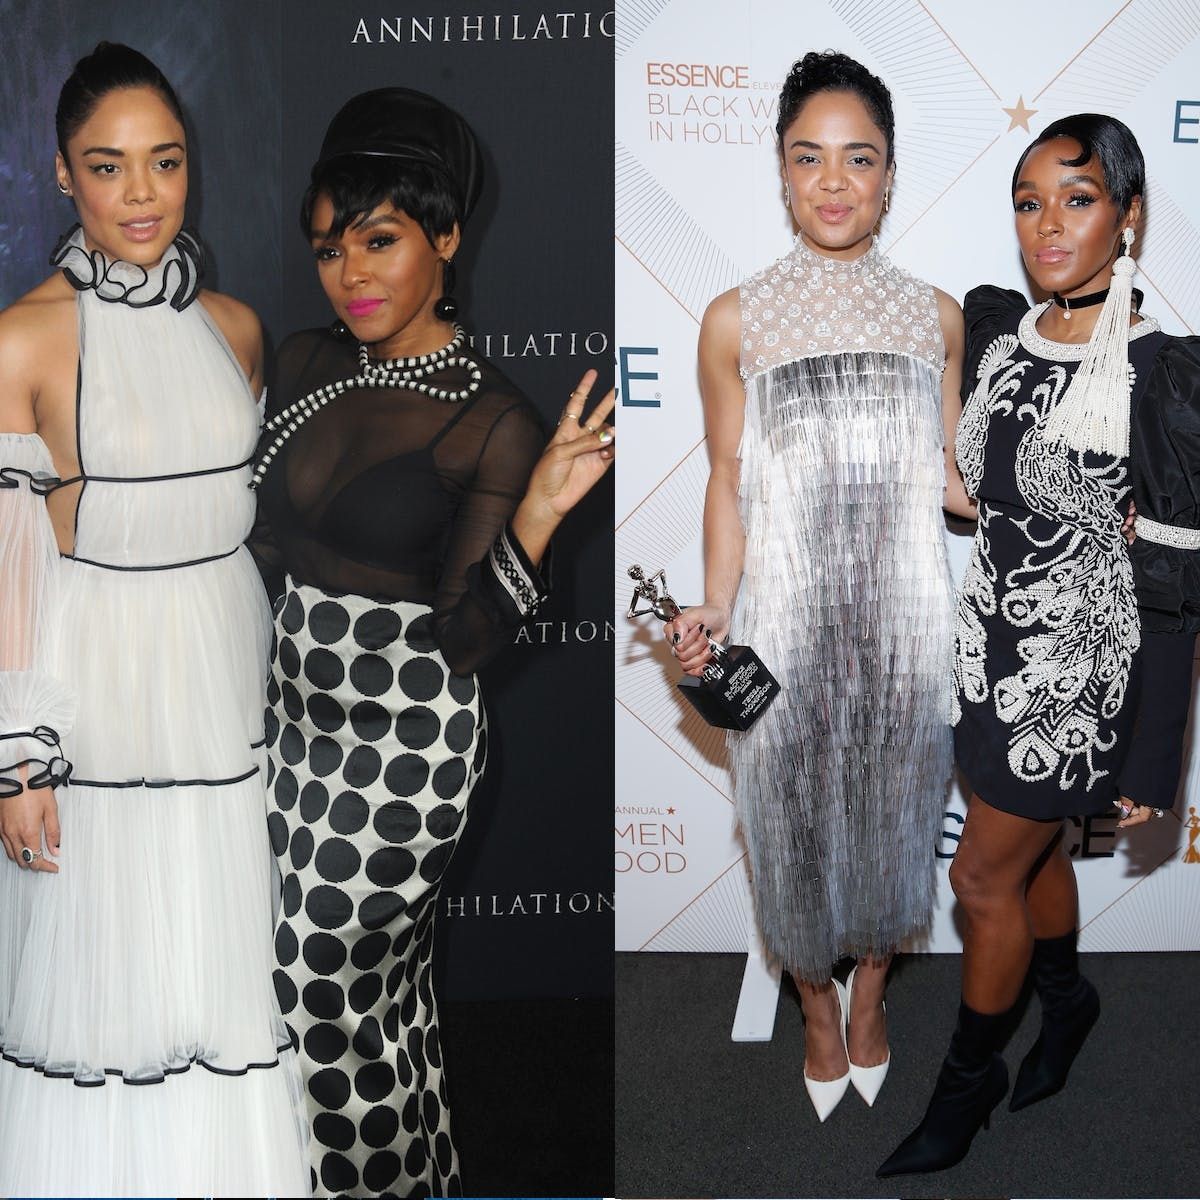 19 Times Tessa Thompson and Janelle Monáe Slayed the Red Carpet Together and Apart